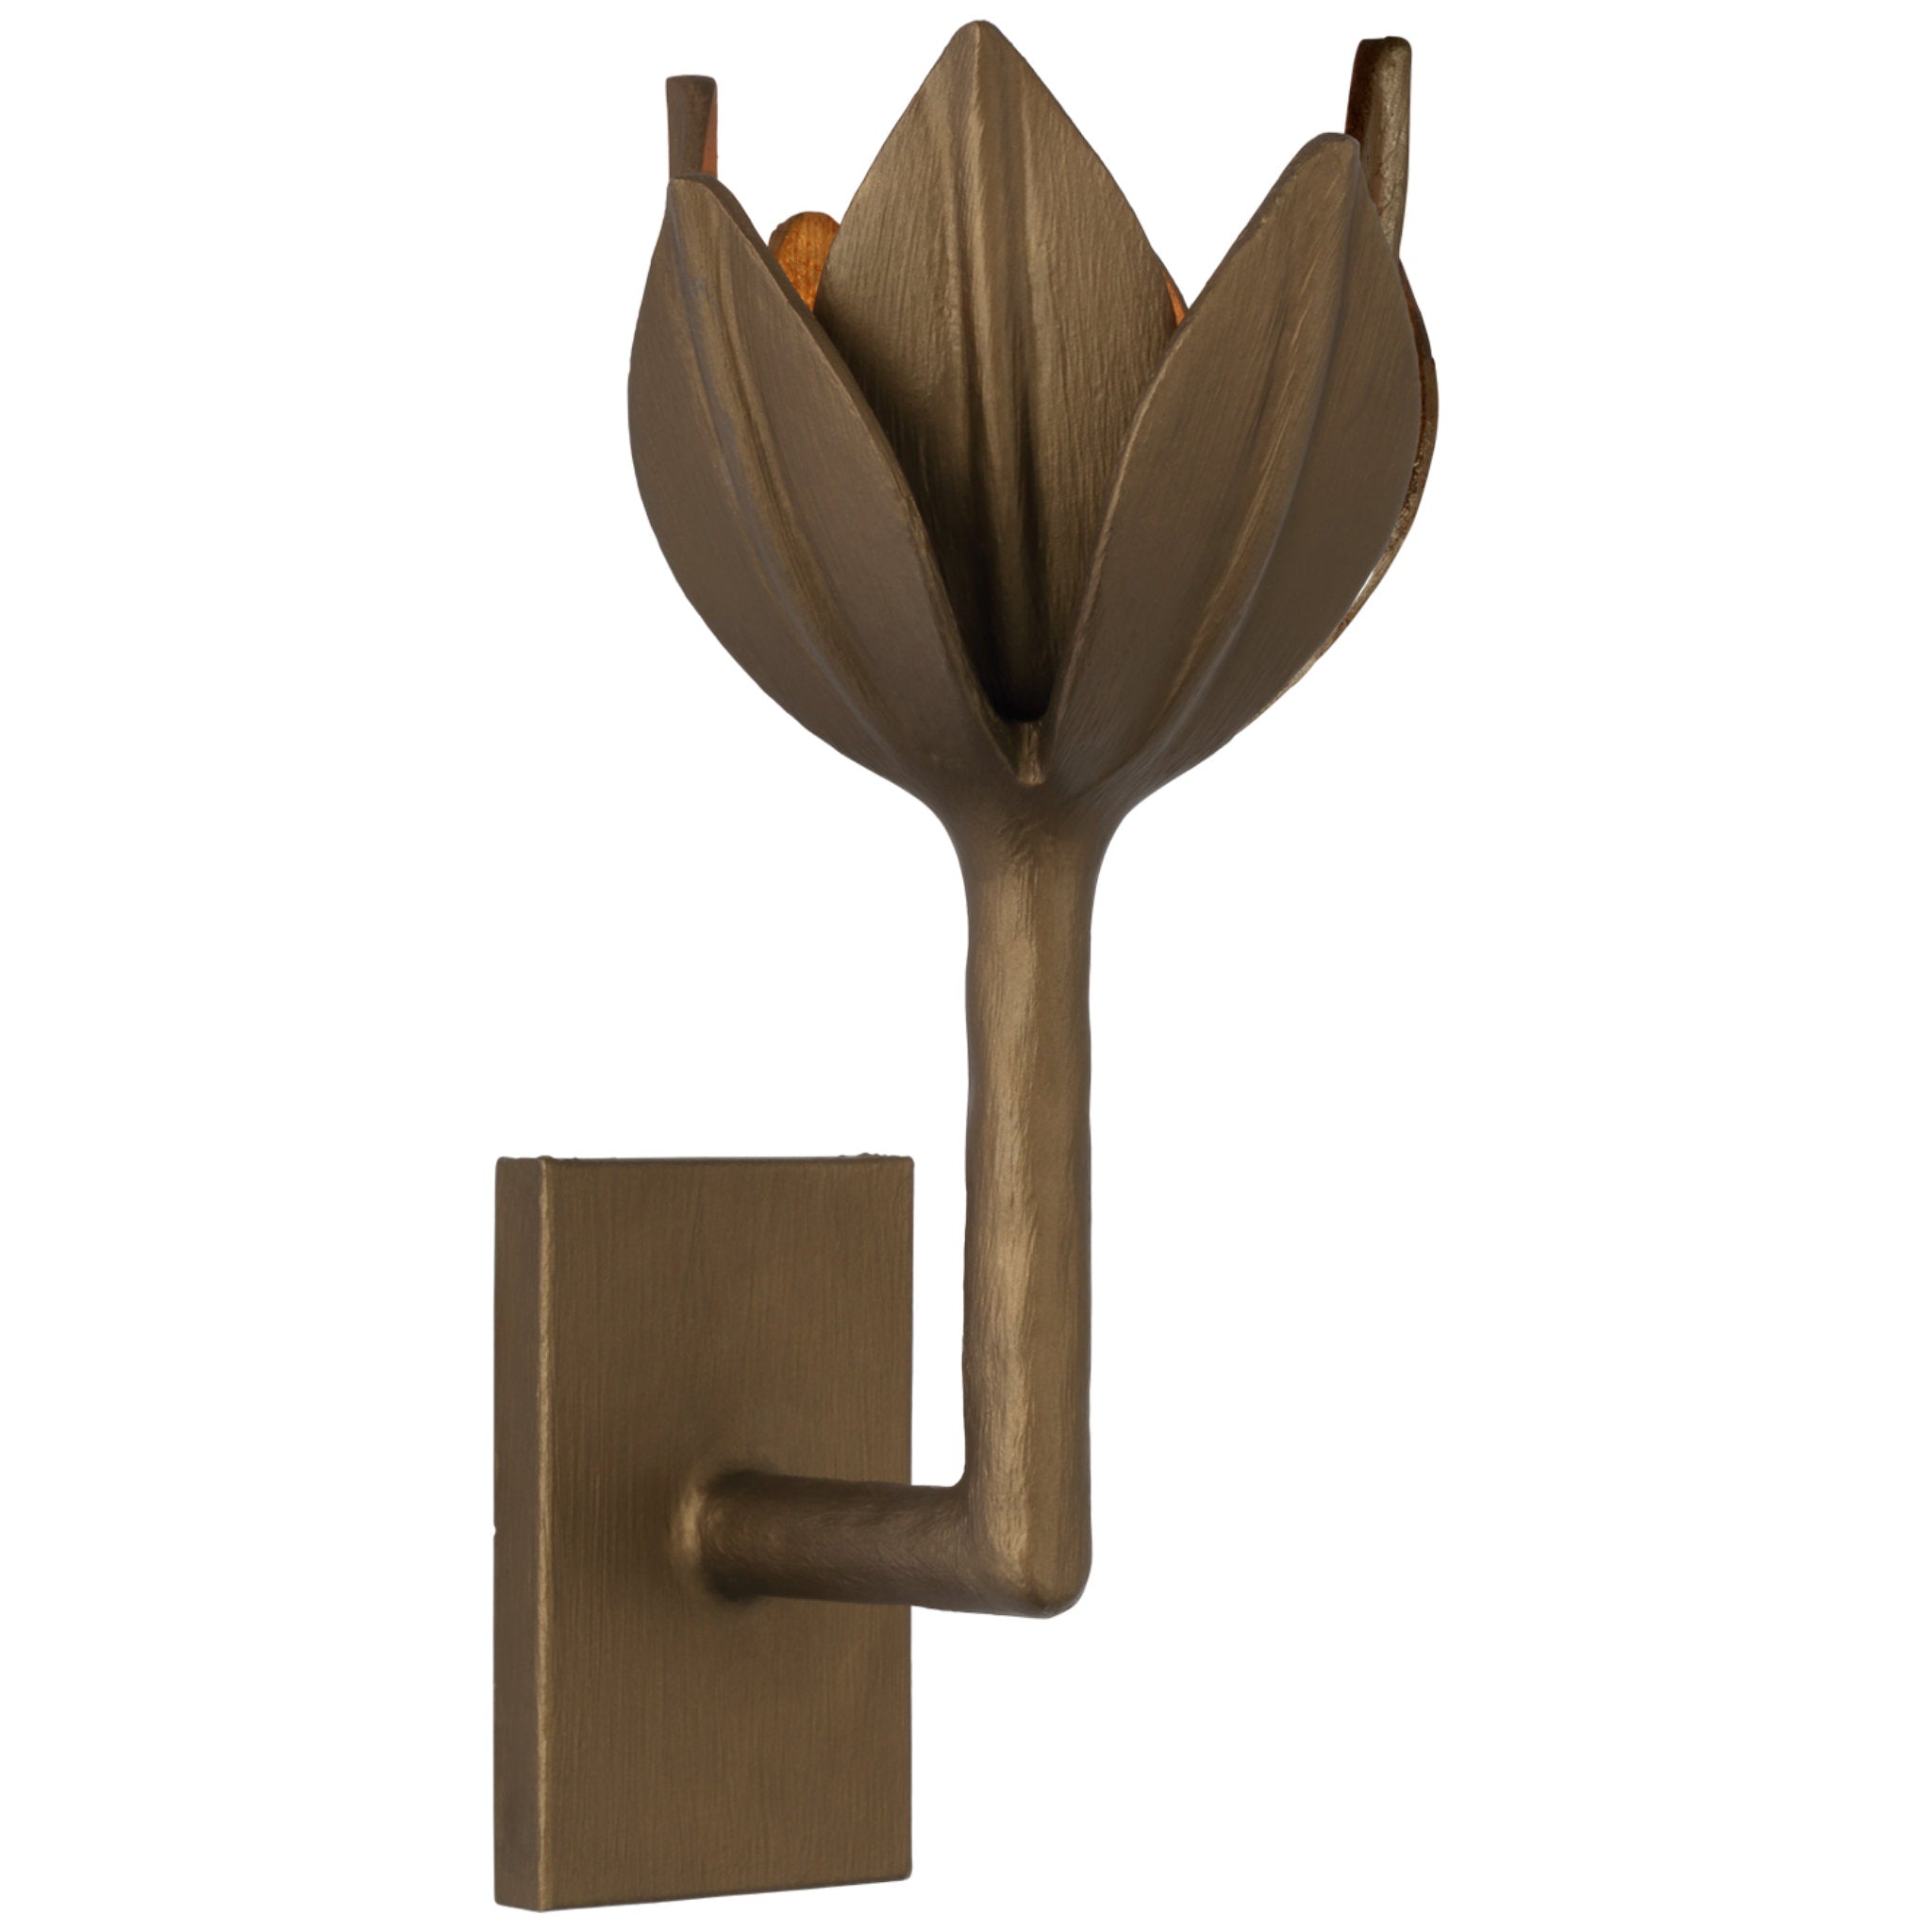 Julie Neill Alberto Small Sconce in Antique Bronze Leaf